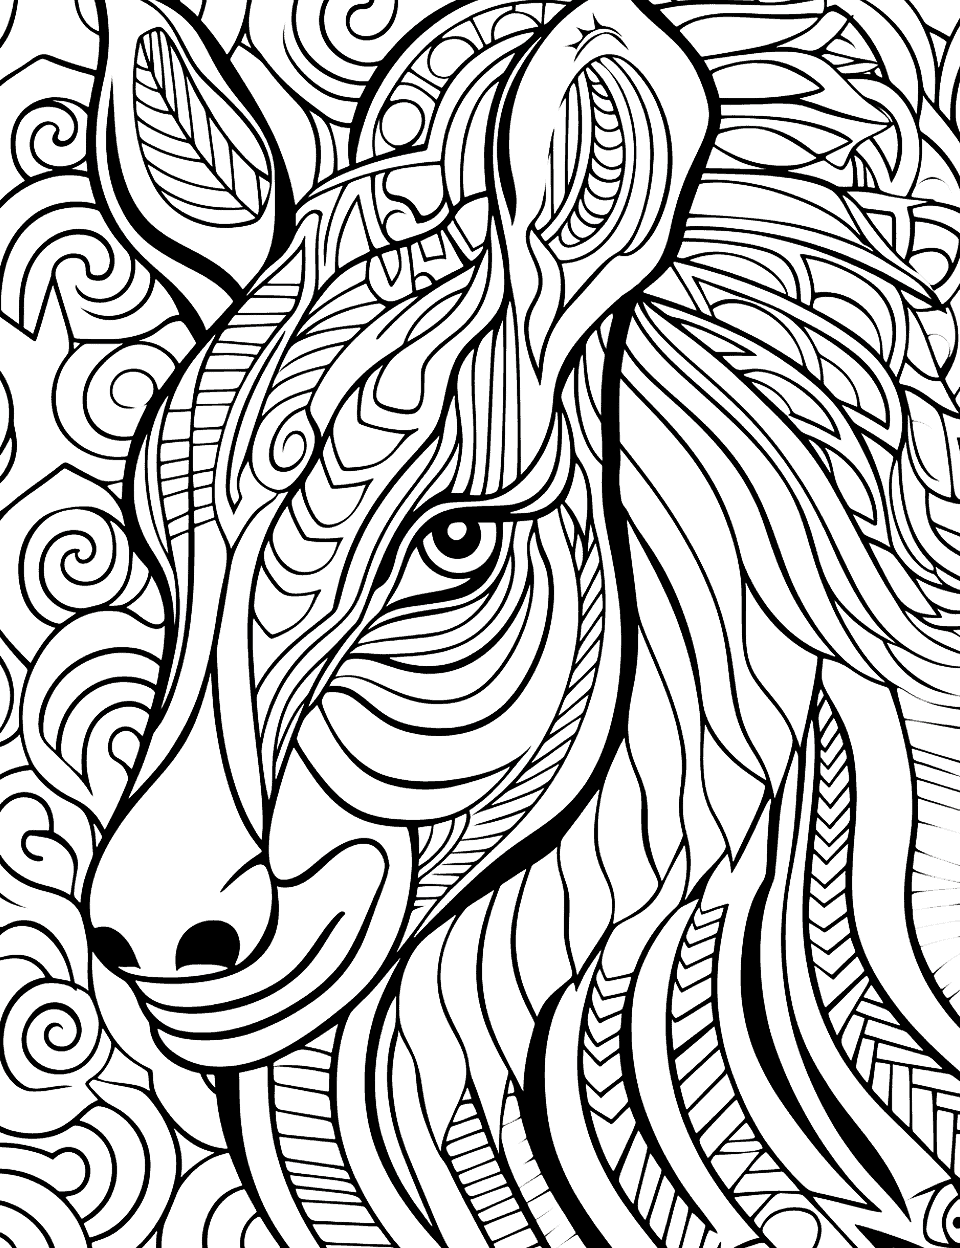 Trippy Horse Pattern Adult Coloring Page - A horse silhouette filled with intricate, trippy patterns creating an abstract and vibrant adult coloring page.